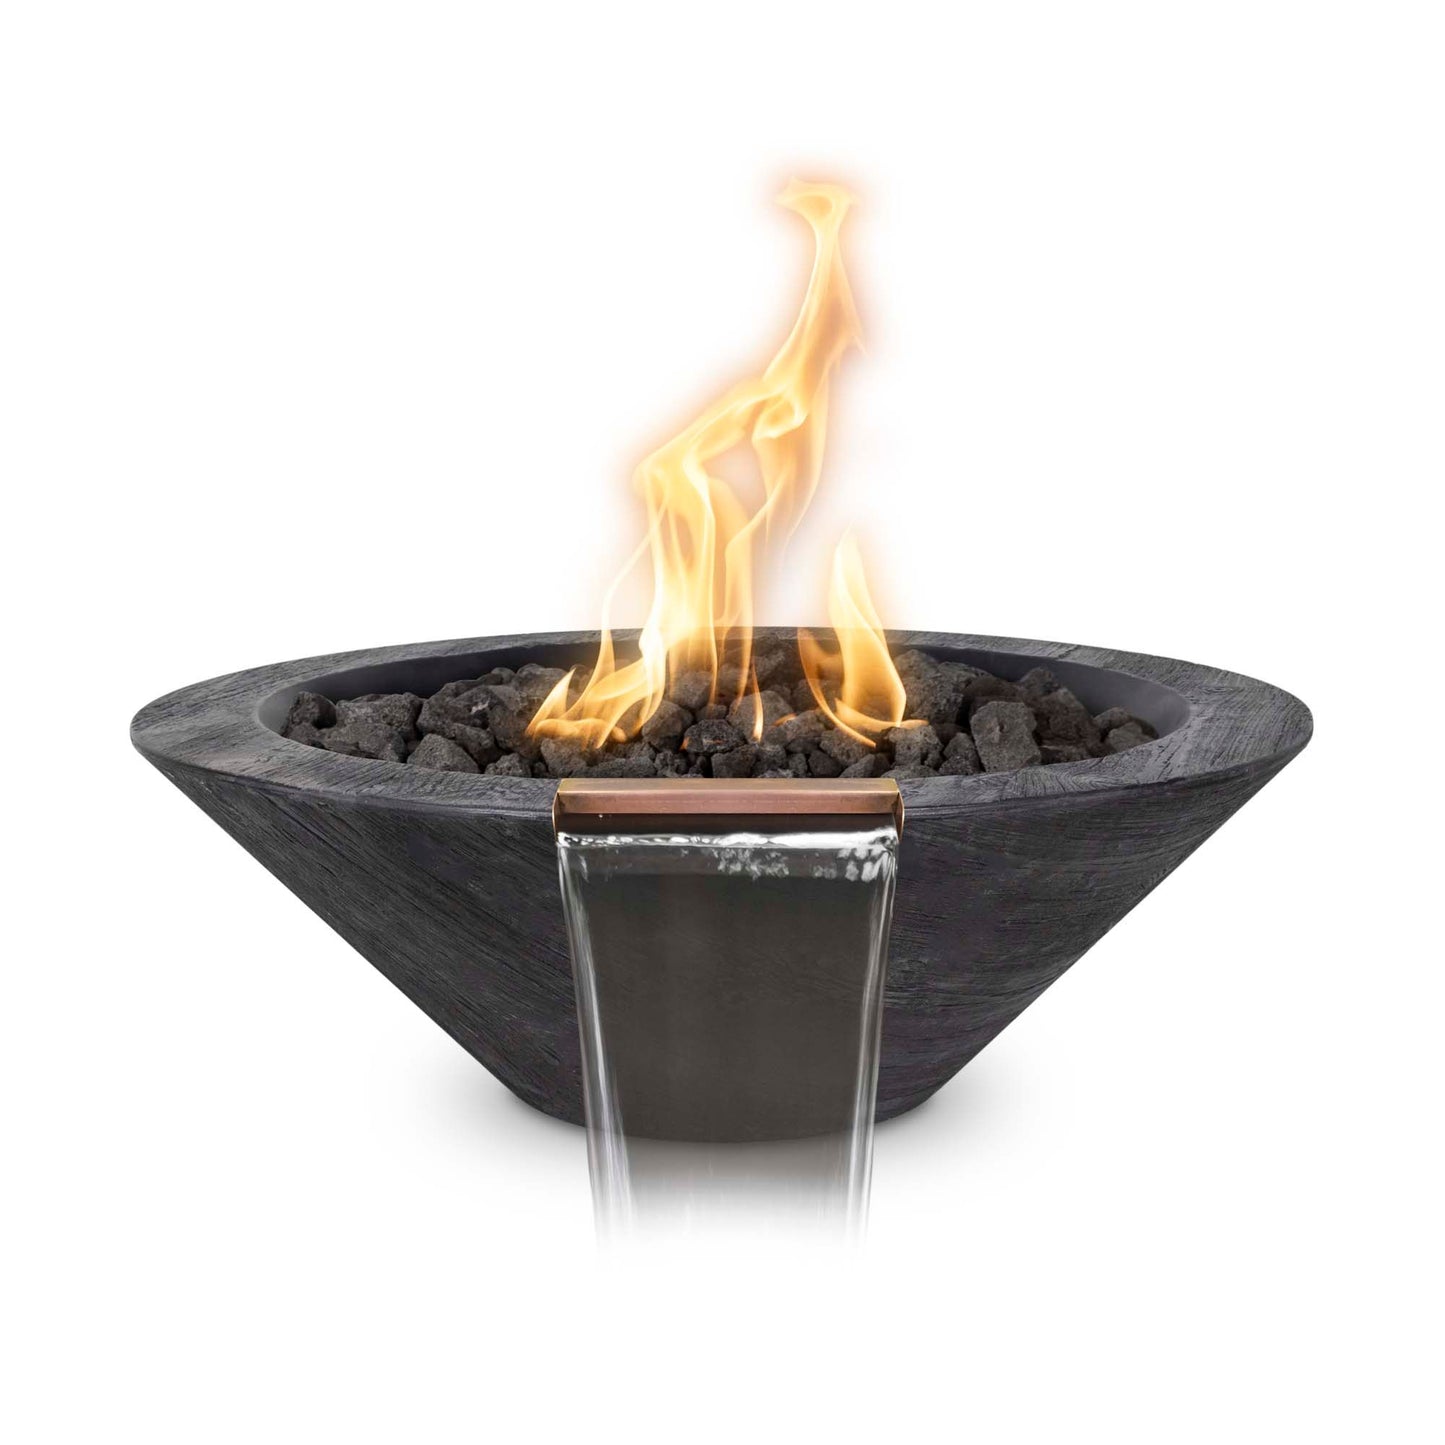 The Outdoor Plus Cazo Wood Grain Fire & Water Bowl - OPT-RWGFW freeshipping - Luxury Tech Inc.